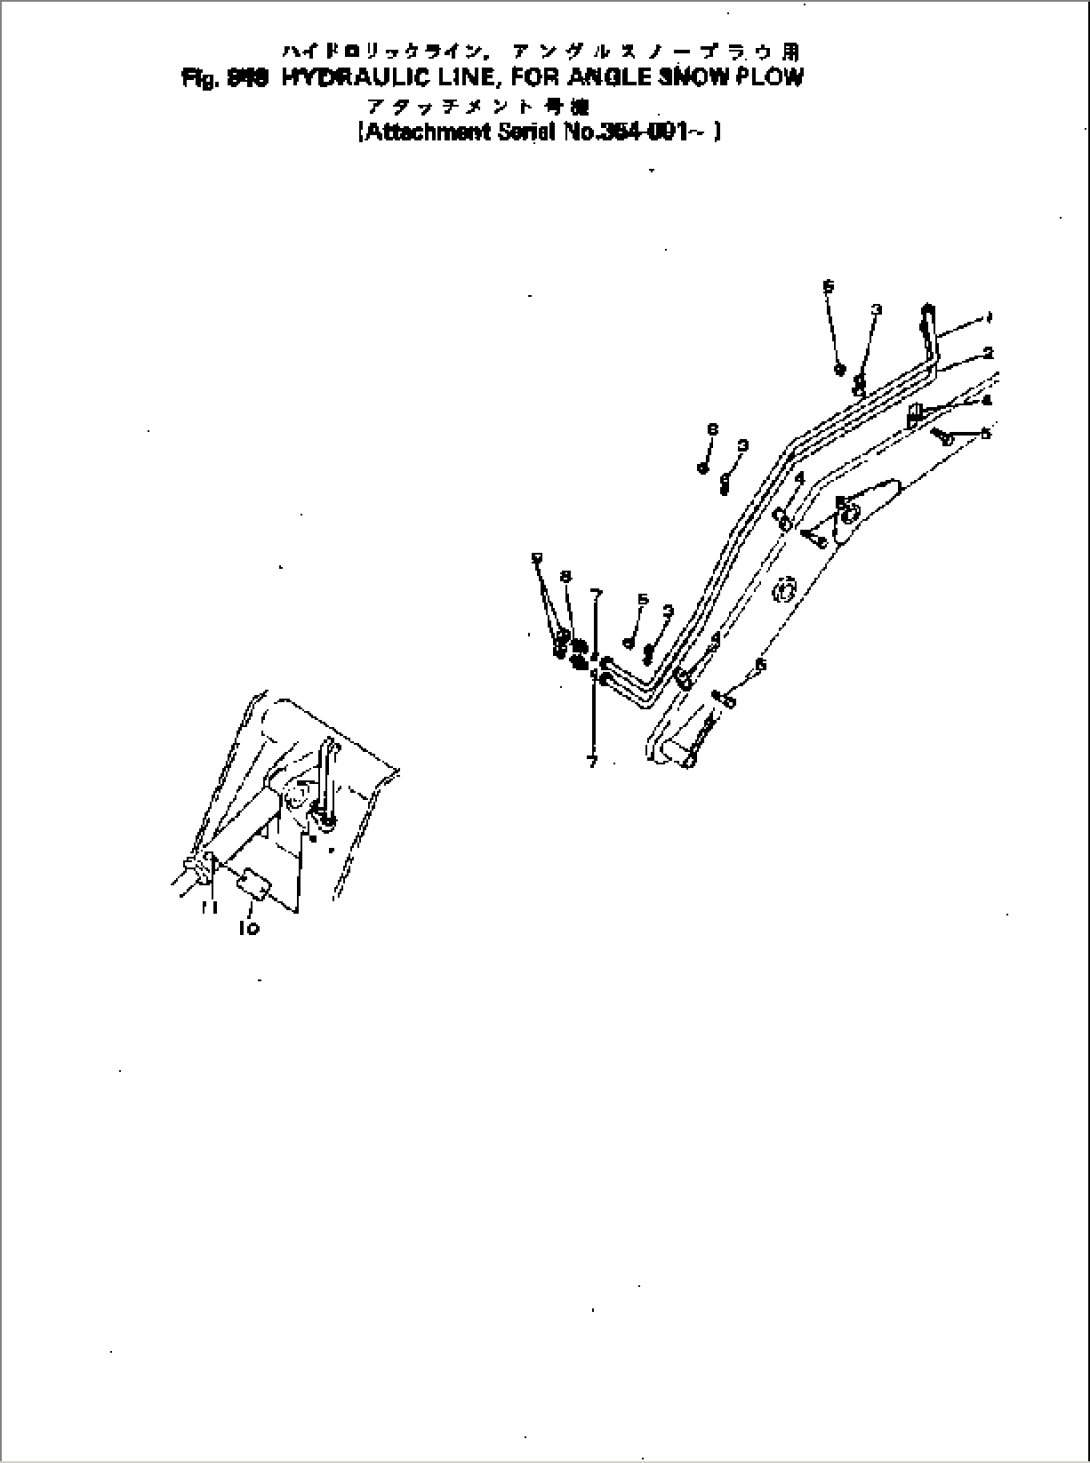 HYDRAULIC LINE (FOR ANGLE SNOW PLOW)